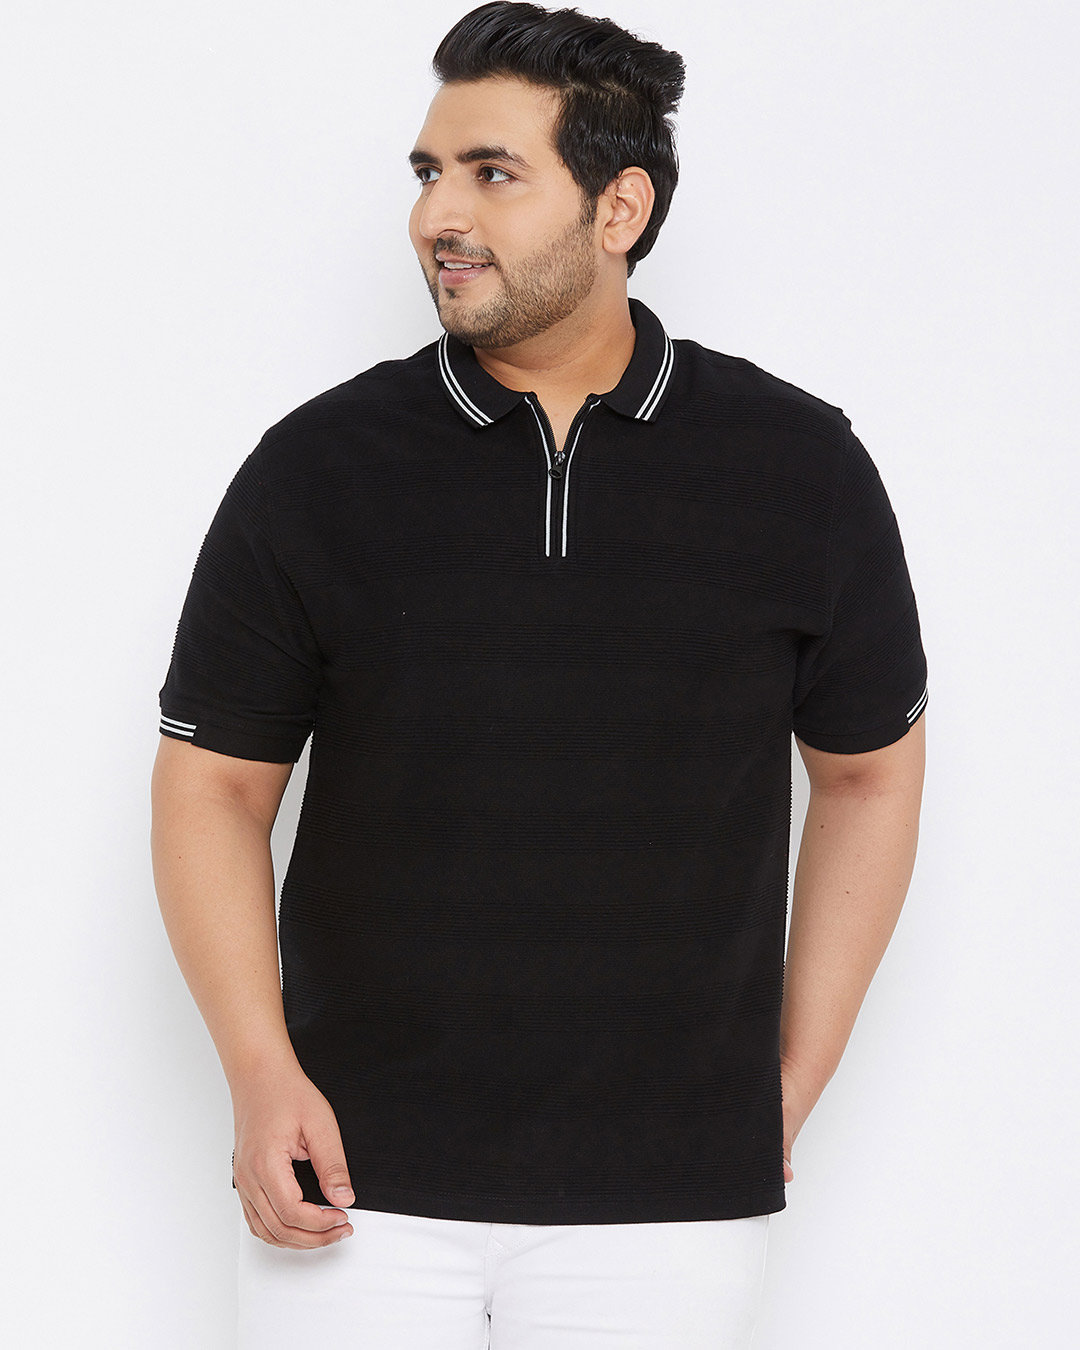 Shop Plus Size Men's Stylish Solid Half Sleeve Casual T-Shirt-Front